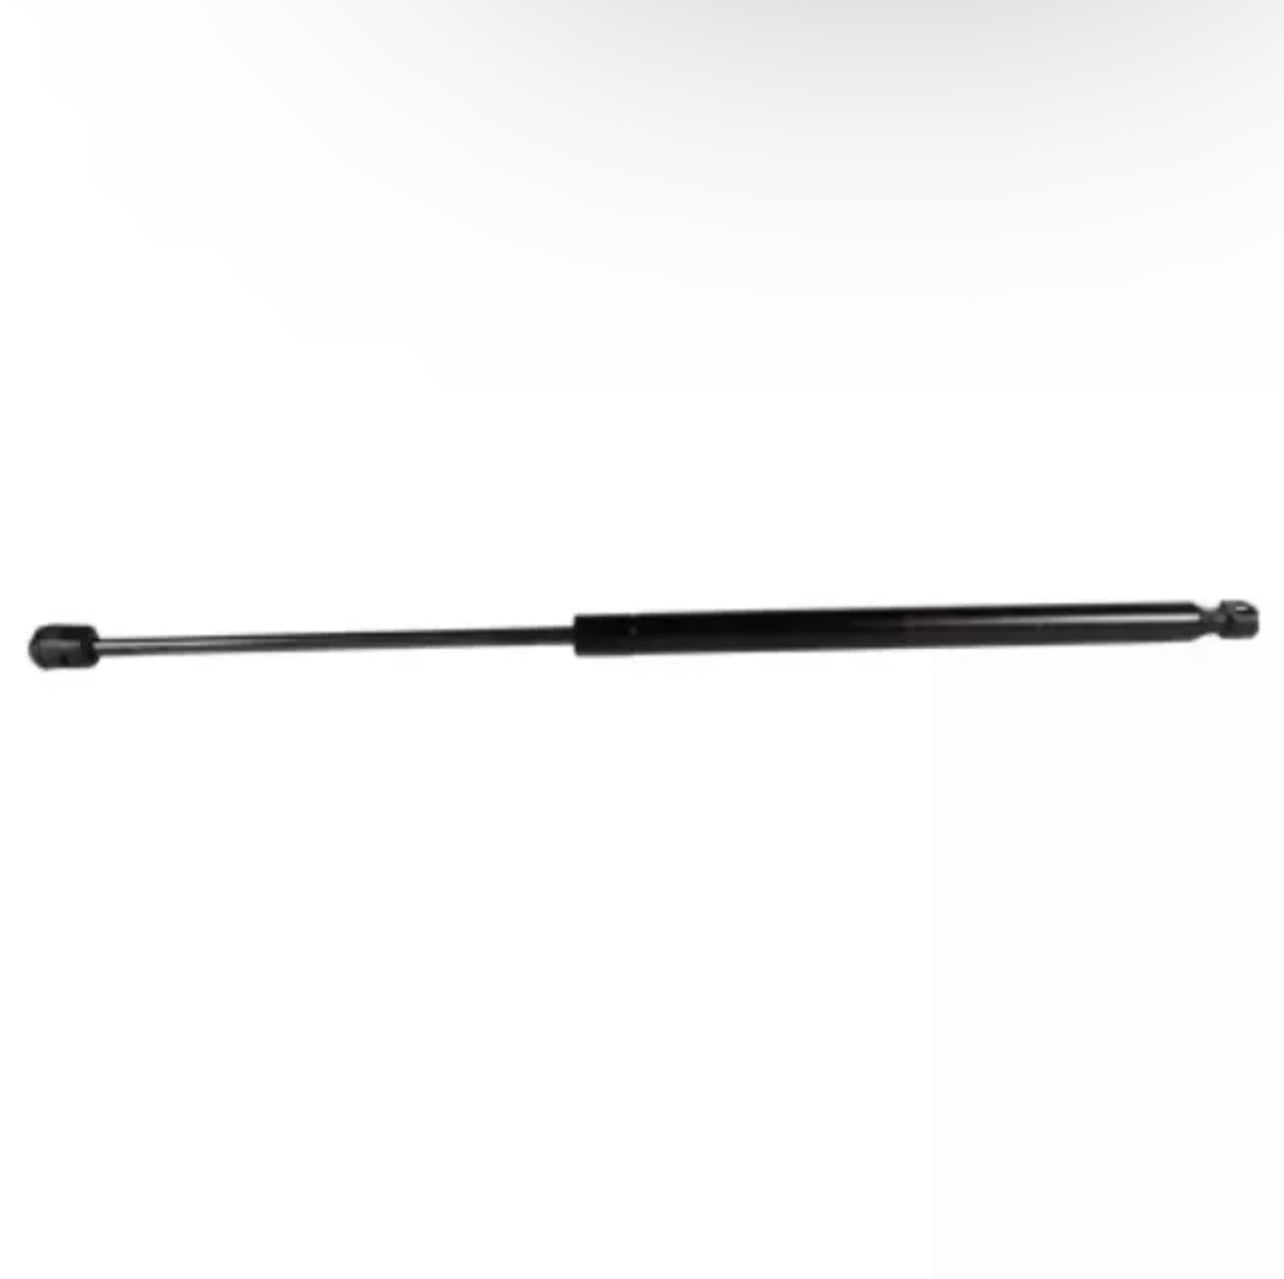 Hood Lift Supports
Part Number: AG1Z16C826B/A